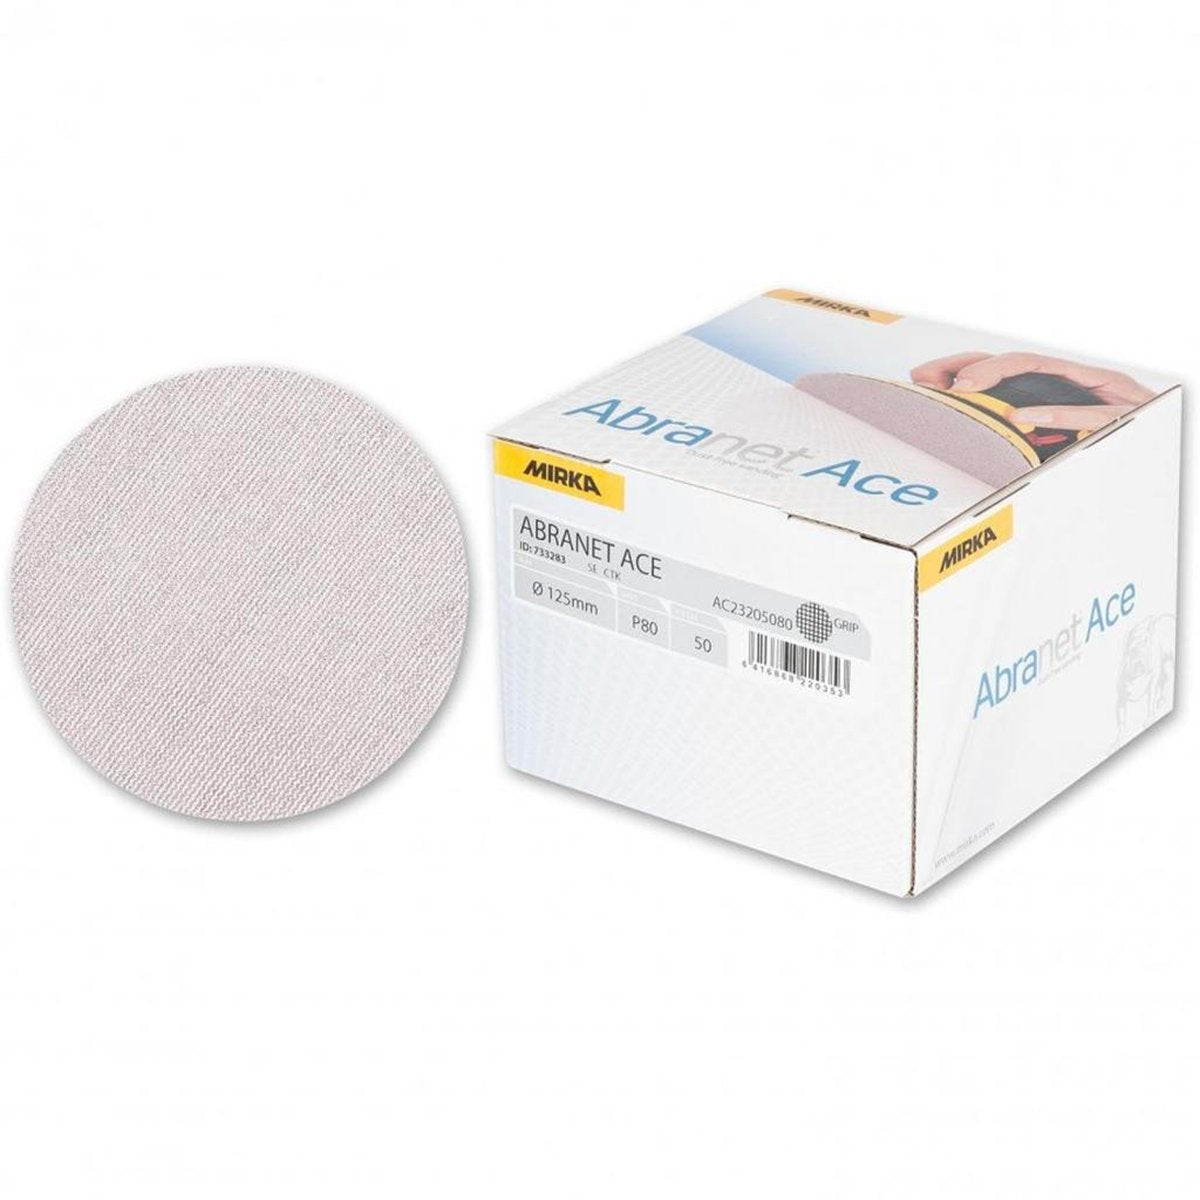 Box of 5" 125mm Mirka Abranet Ace P80 mesh abrasive, with one round disc out.